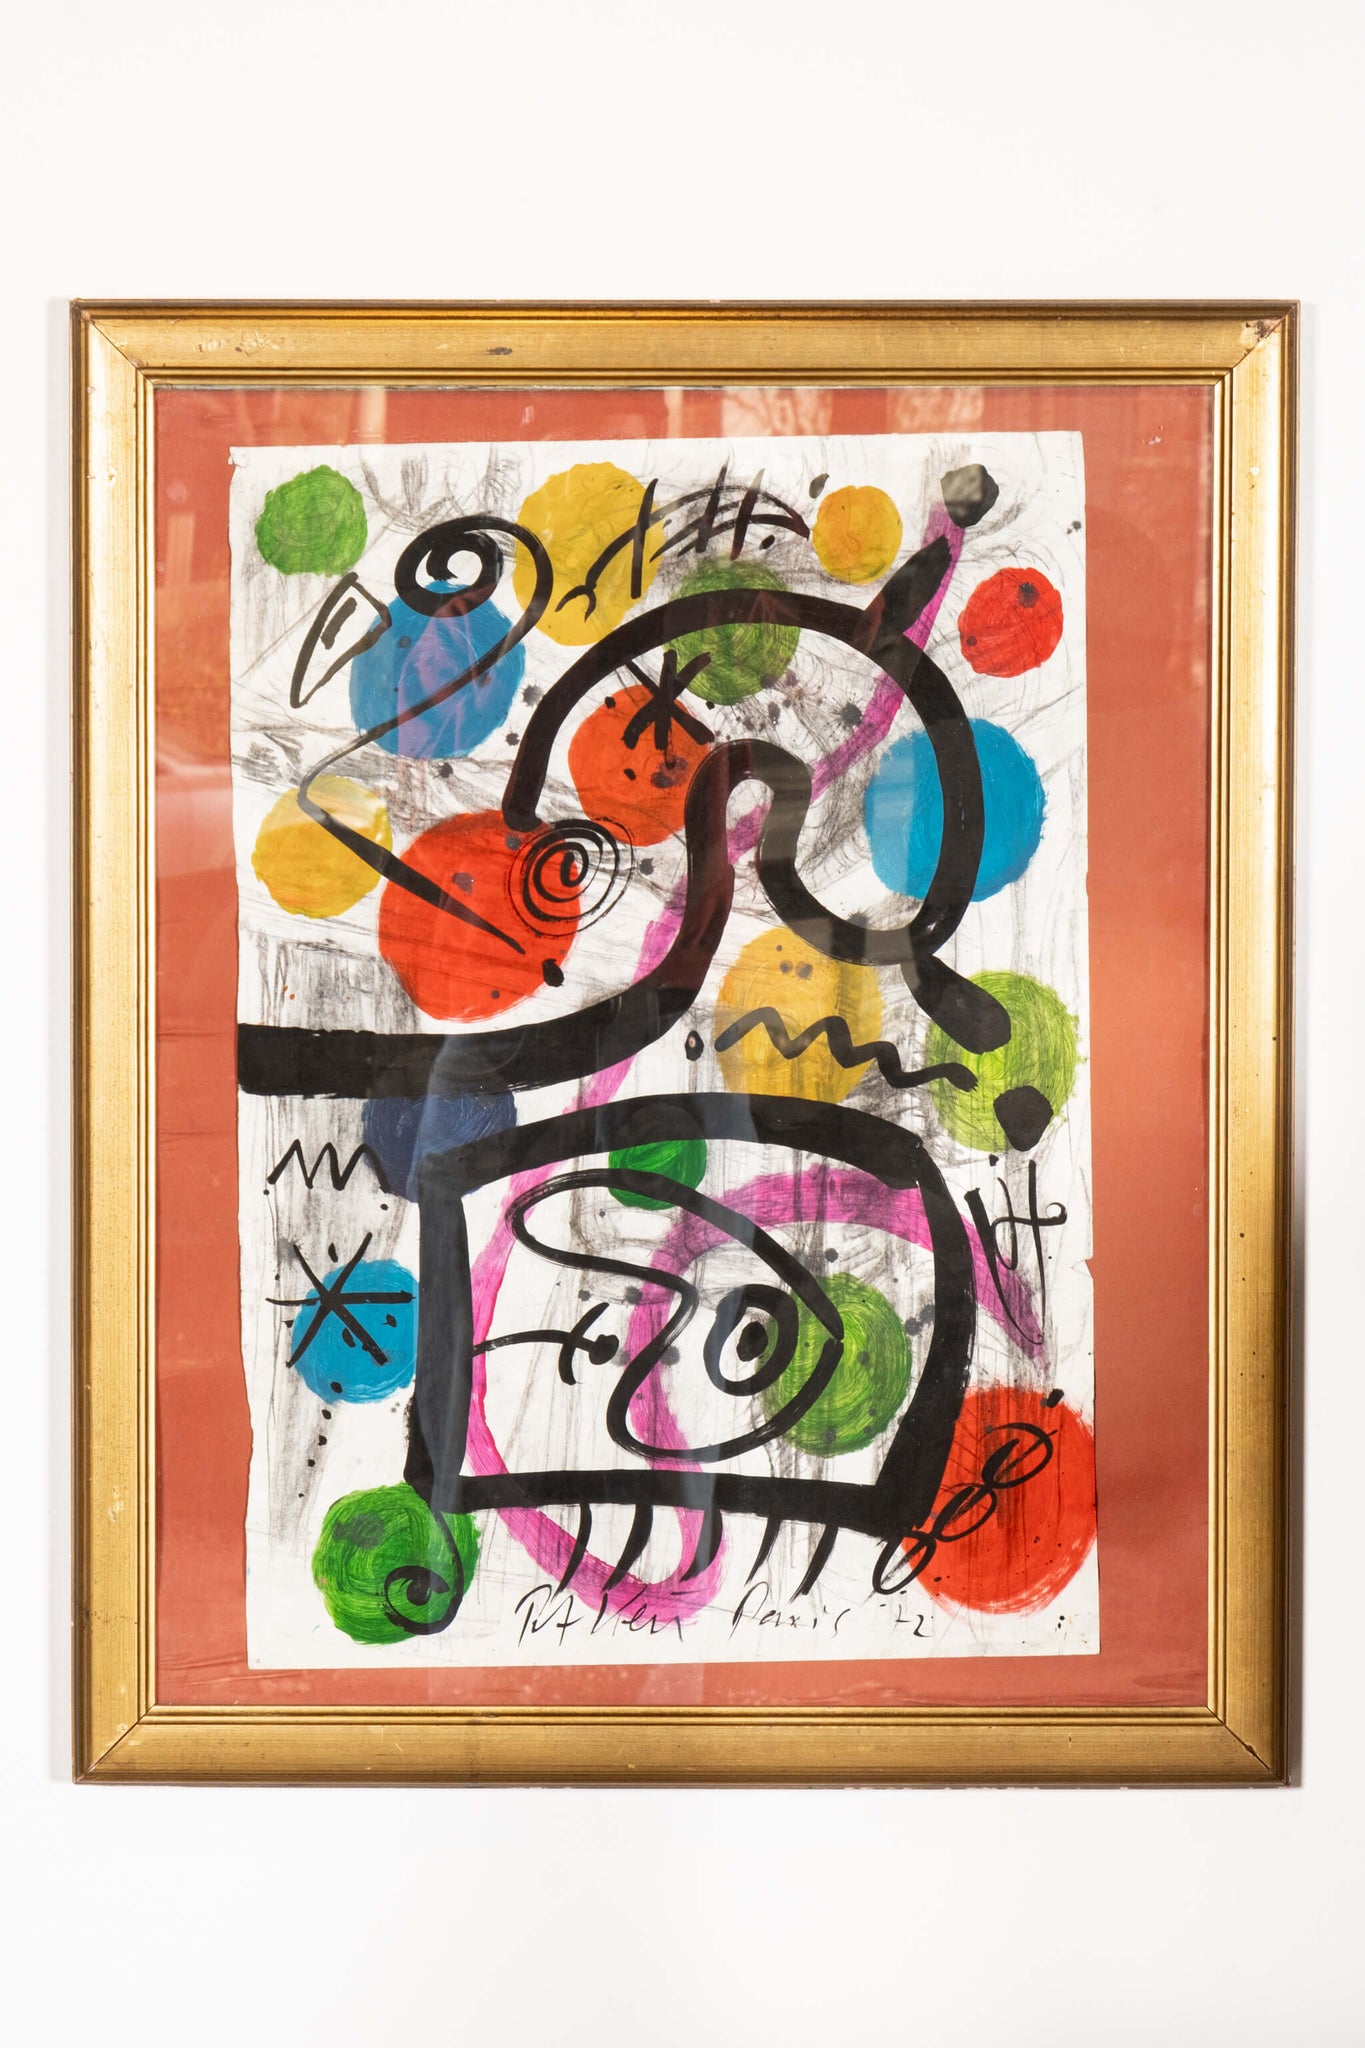 Bonne Choice - Abstract Peter Keil "Miro" in gold frame